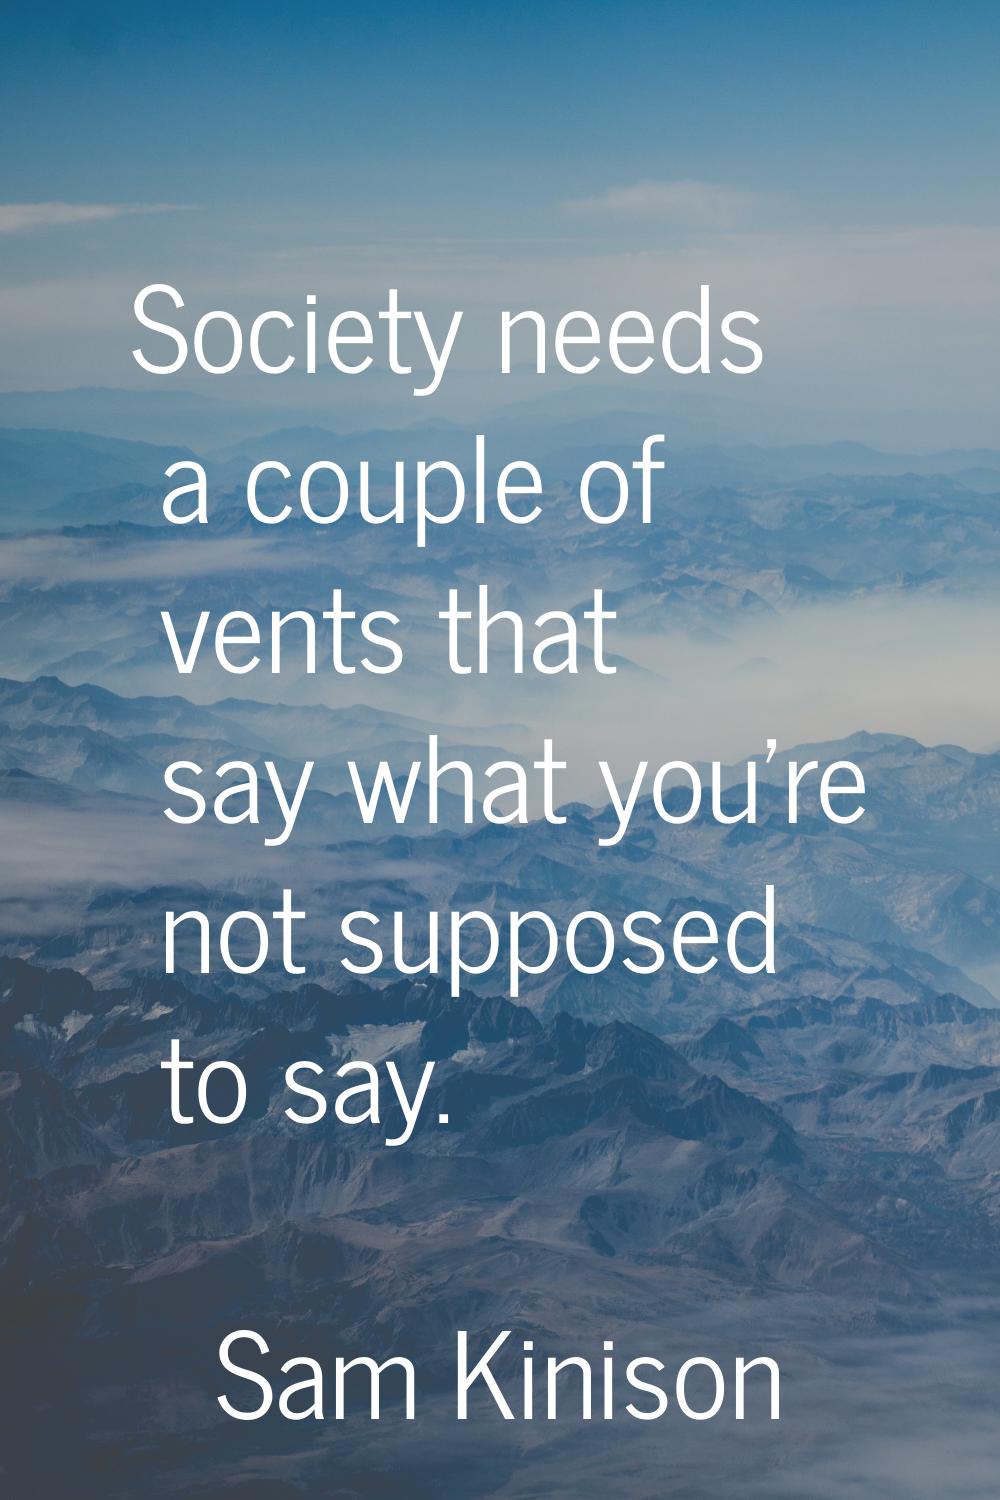 Society needs a couple of vents that say what you're not supposed to say.